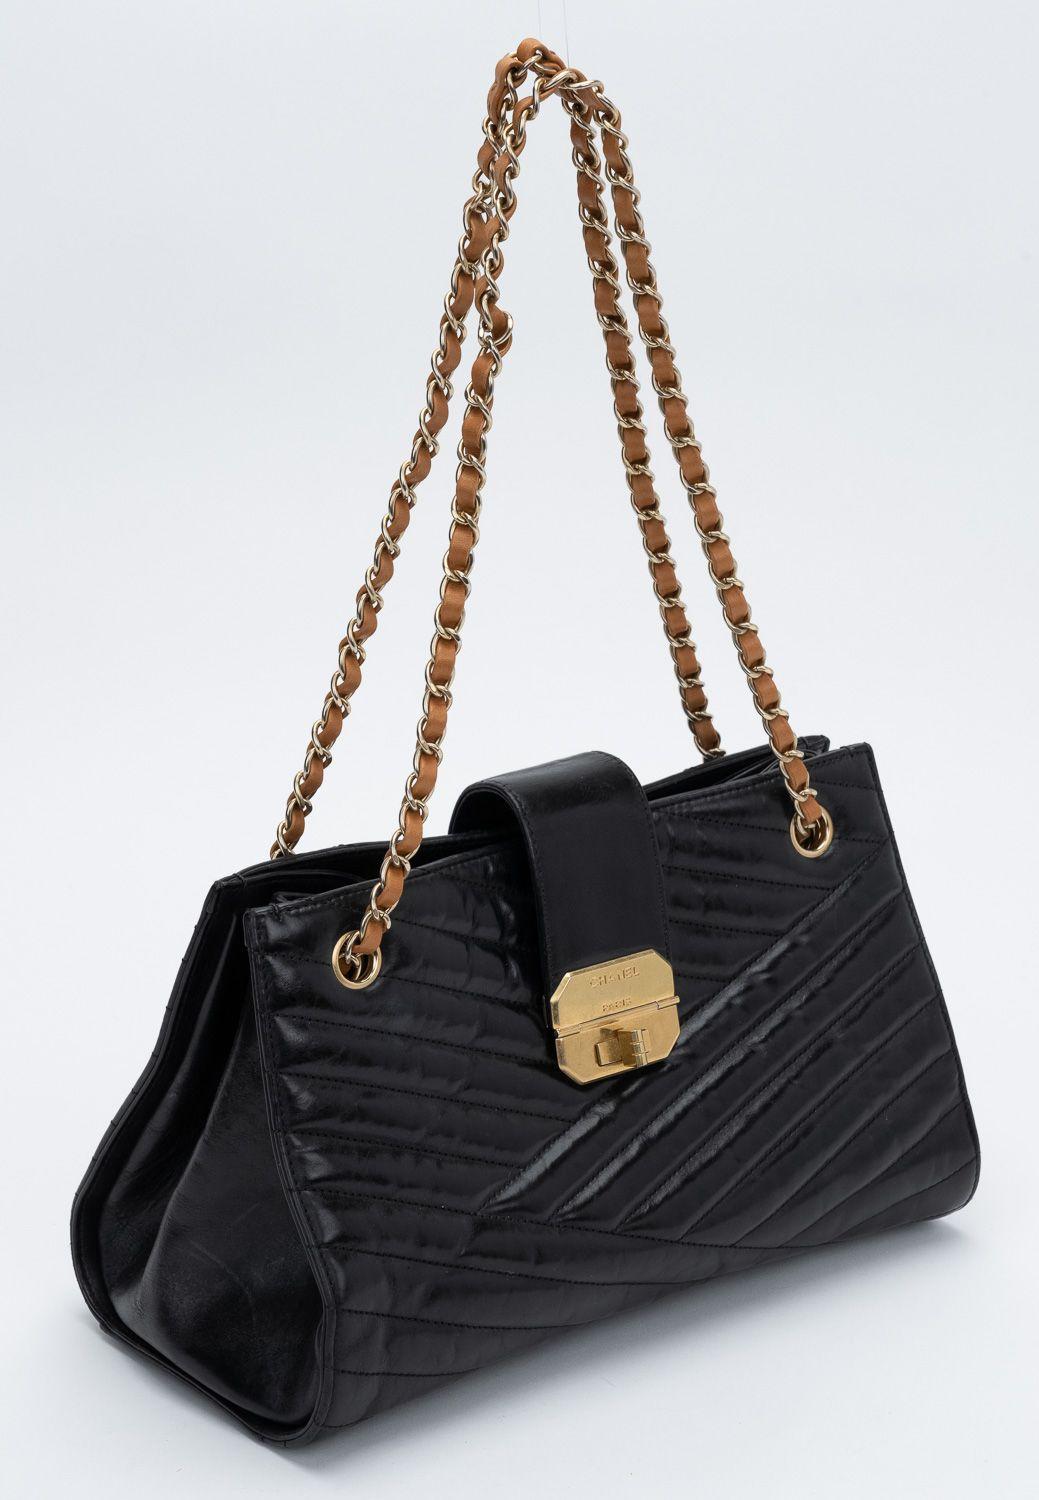 Black Chanel Gabrielle tote with brown leather straps. Satin finish gold hardware. Shoulder drop 11/20